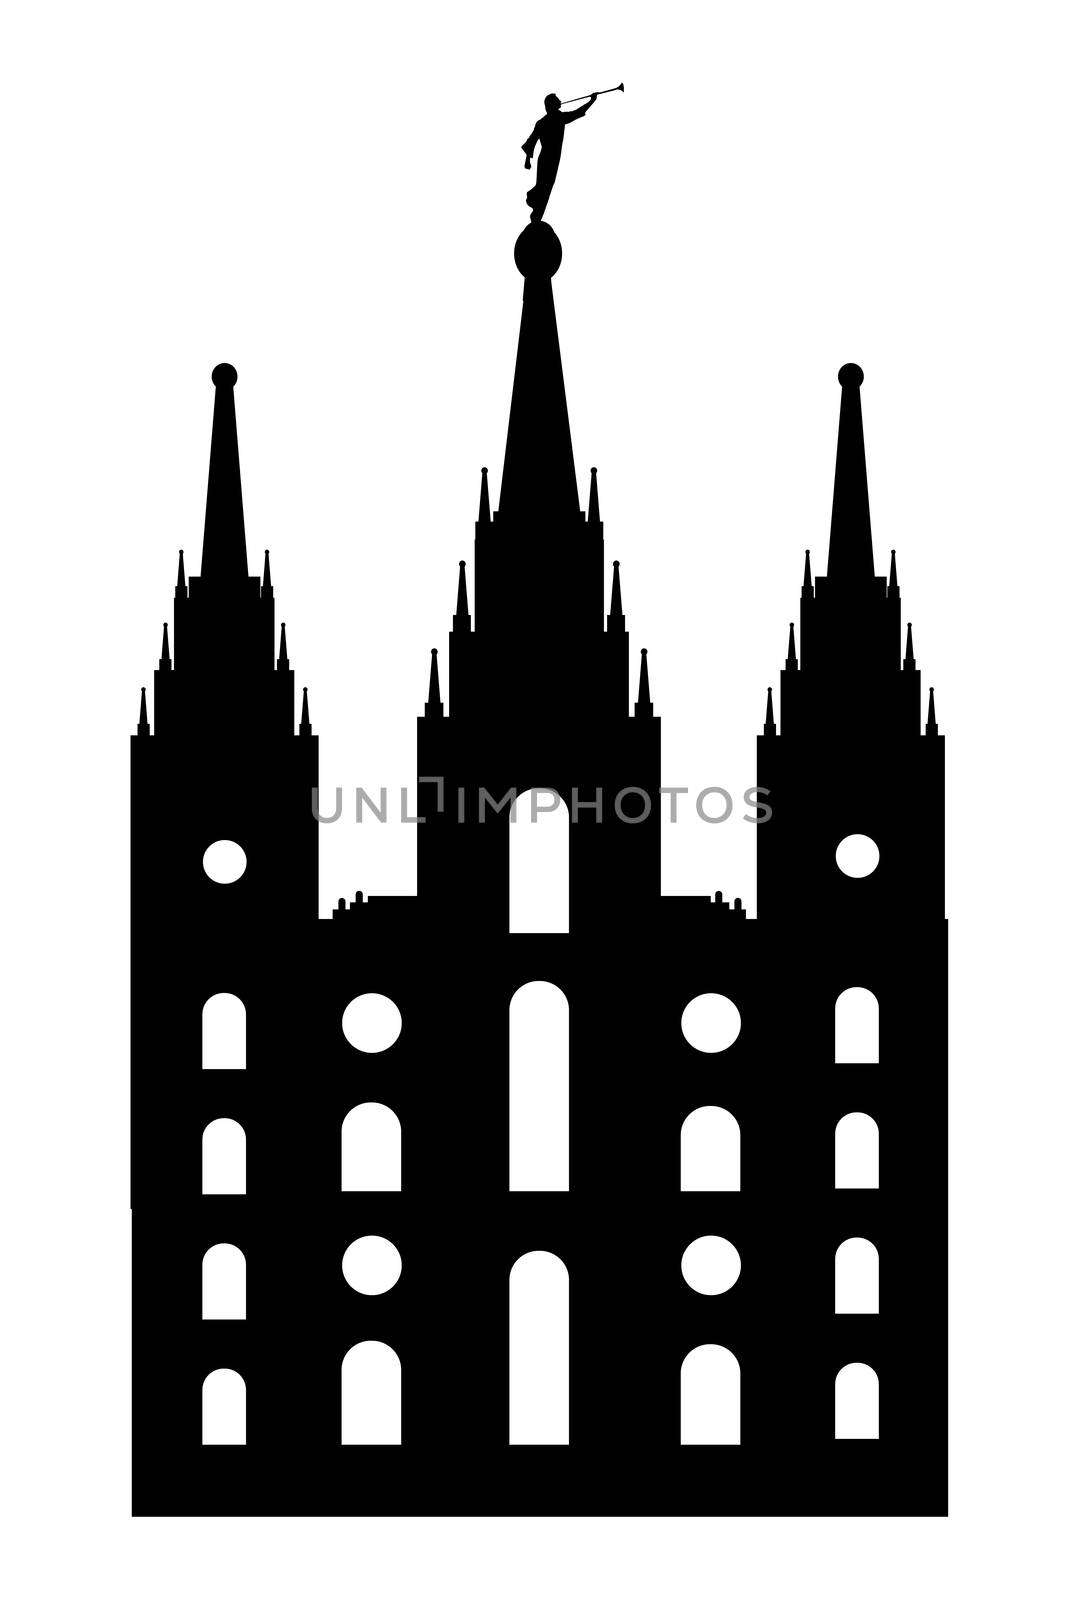 Mormon style temple drawing is silhouette over a white background